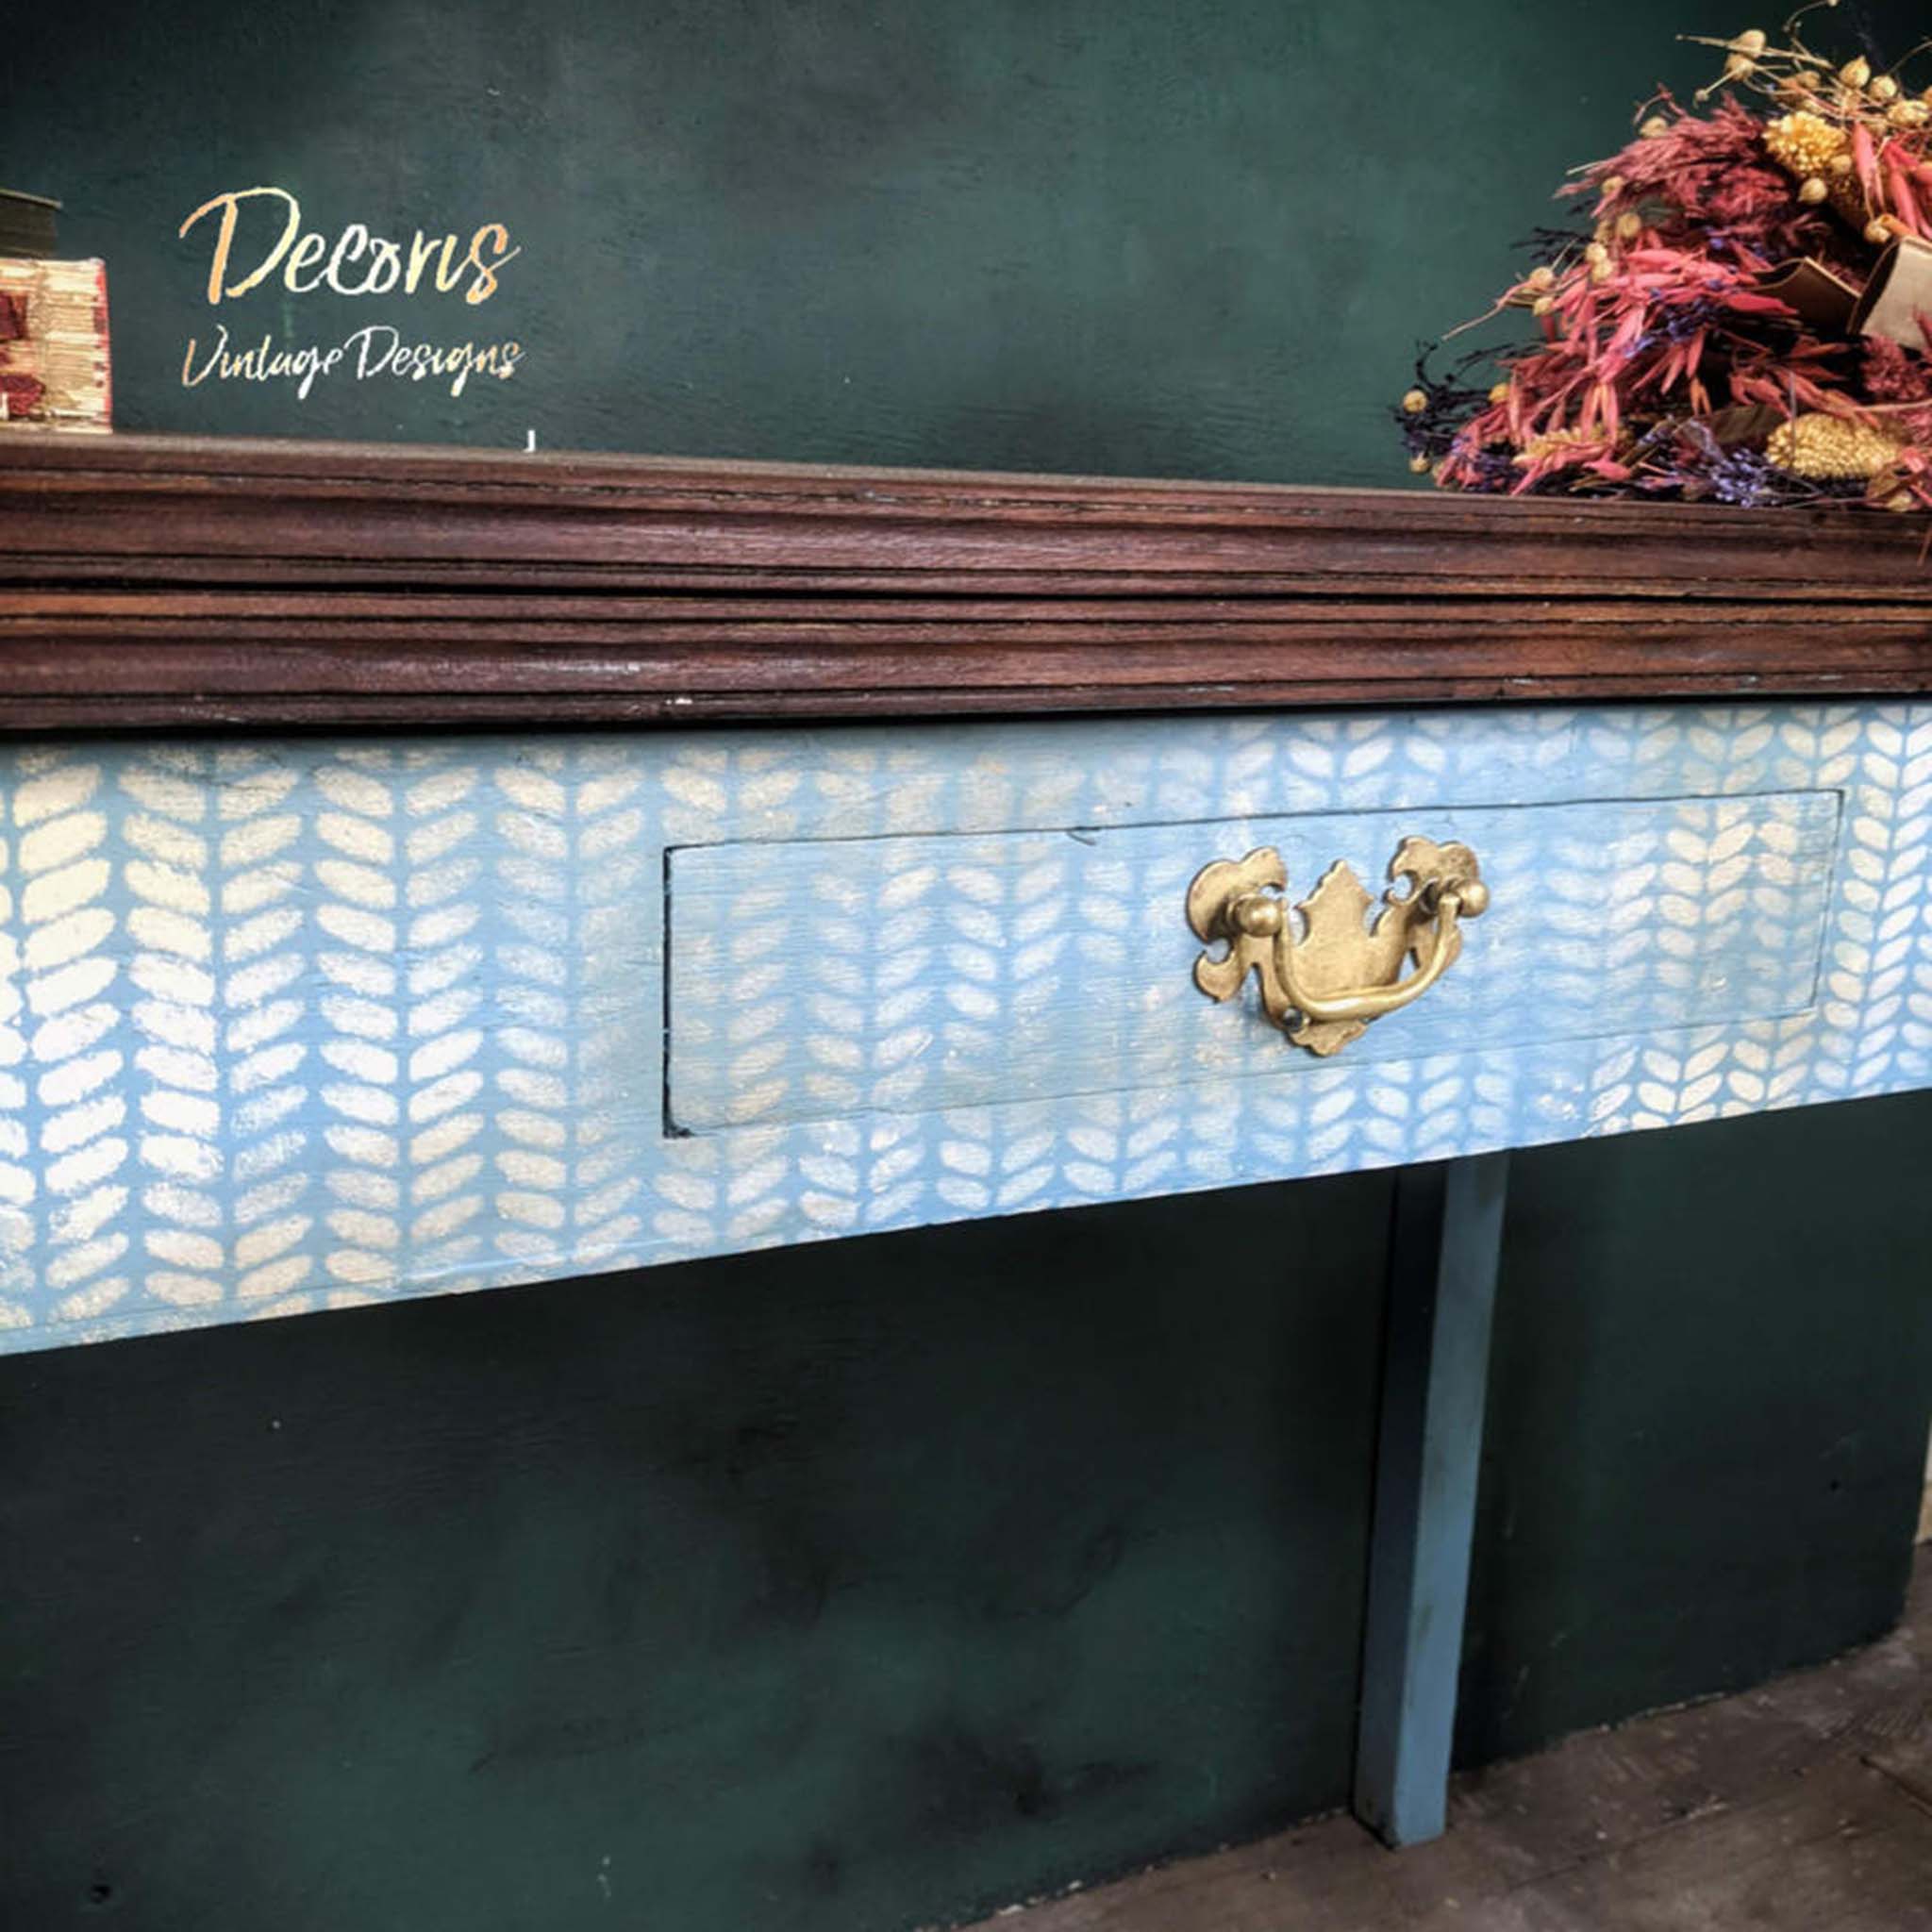 A vintage desk with a small drawer refurbished by Decoris Vintage Designs is painted light blue with a natural wood desktop. Belles & Whistles Cozy Sweater mylar stencil design is featured on the blue in a soft white color.